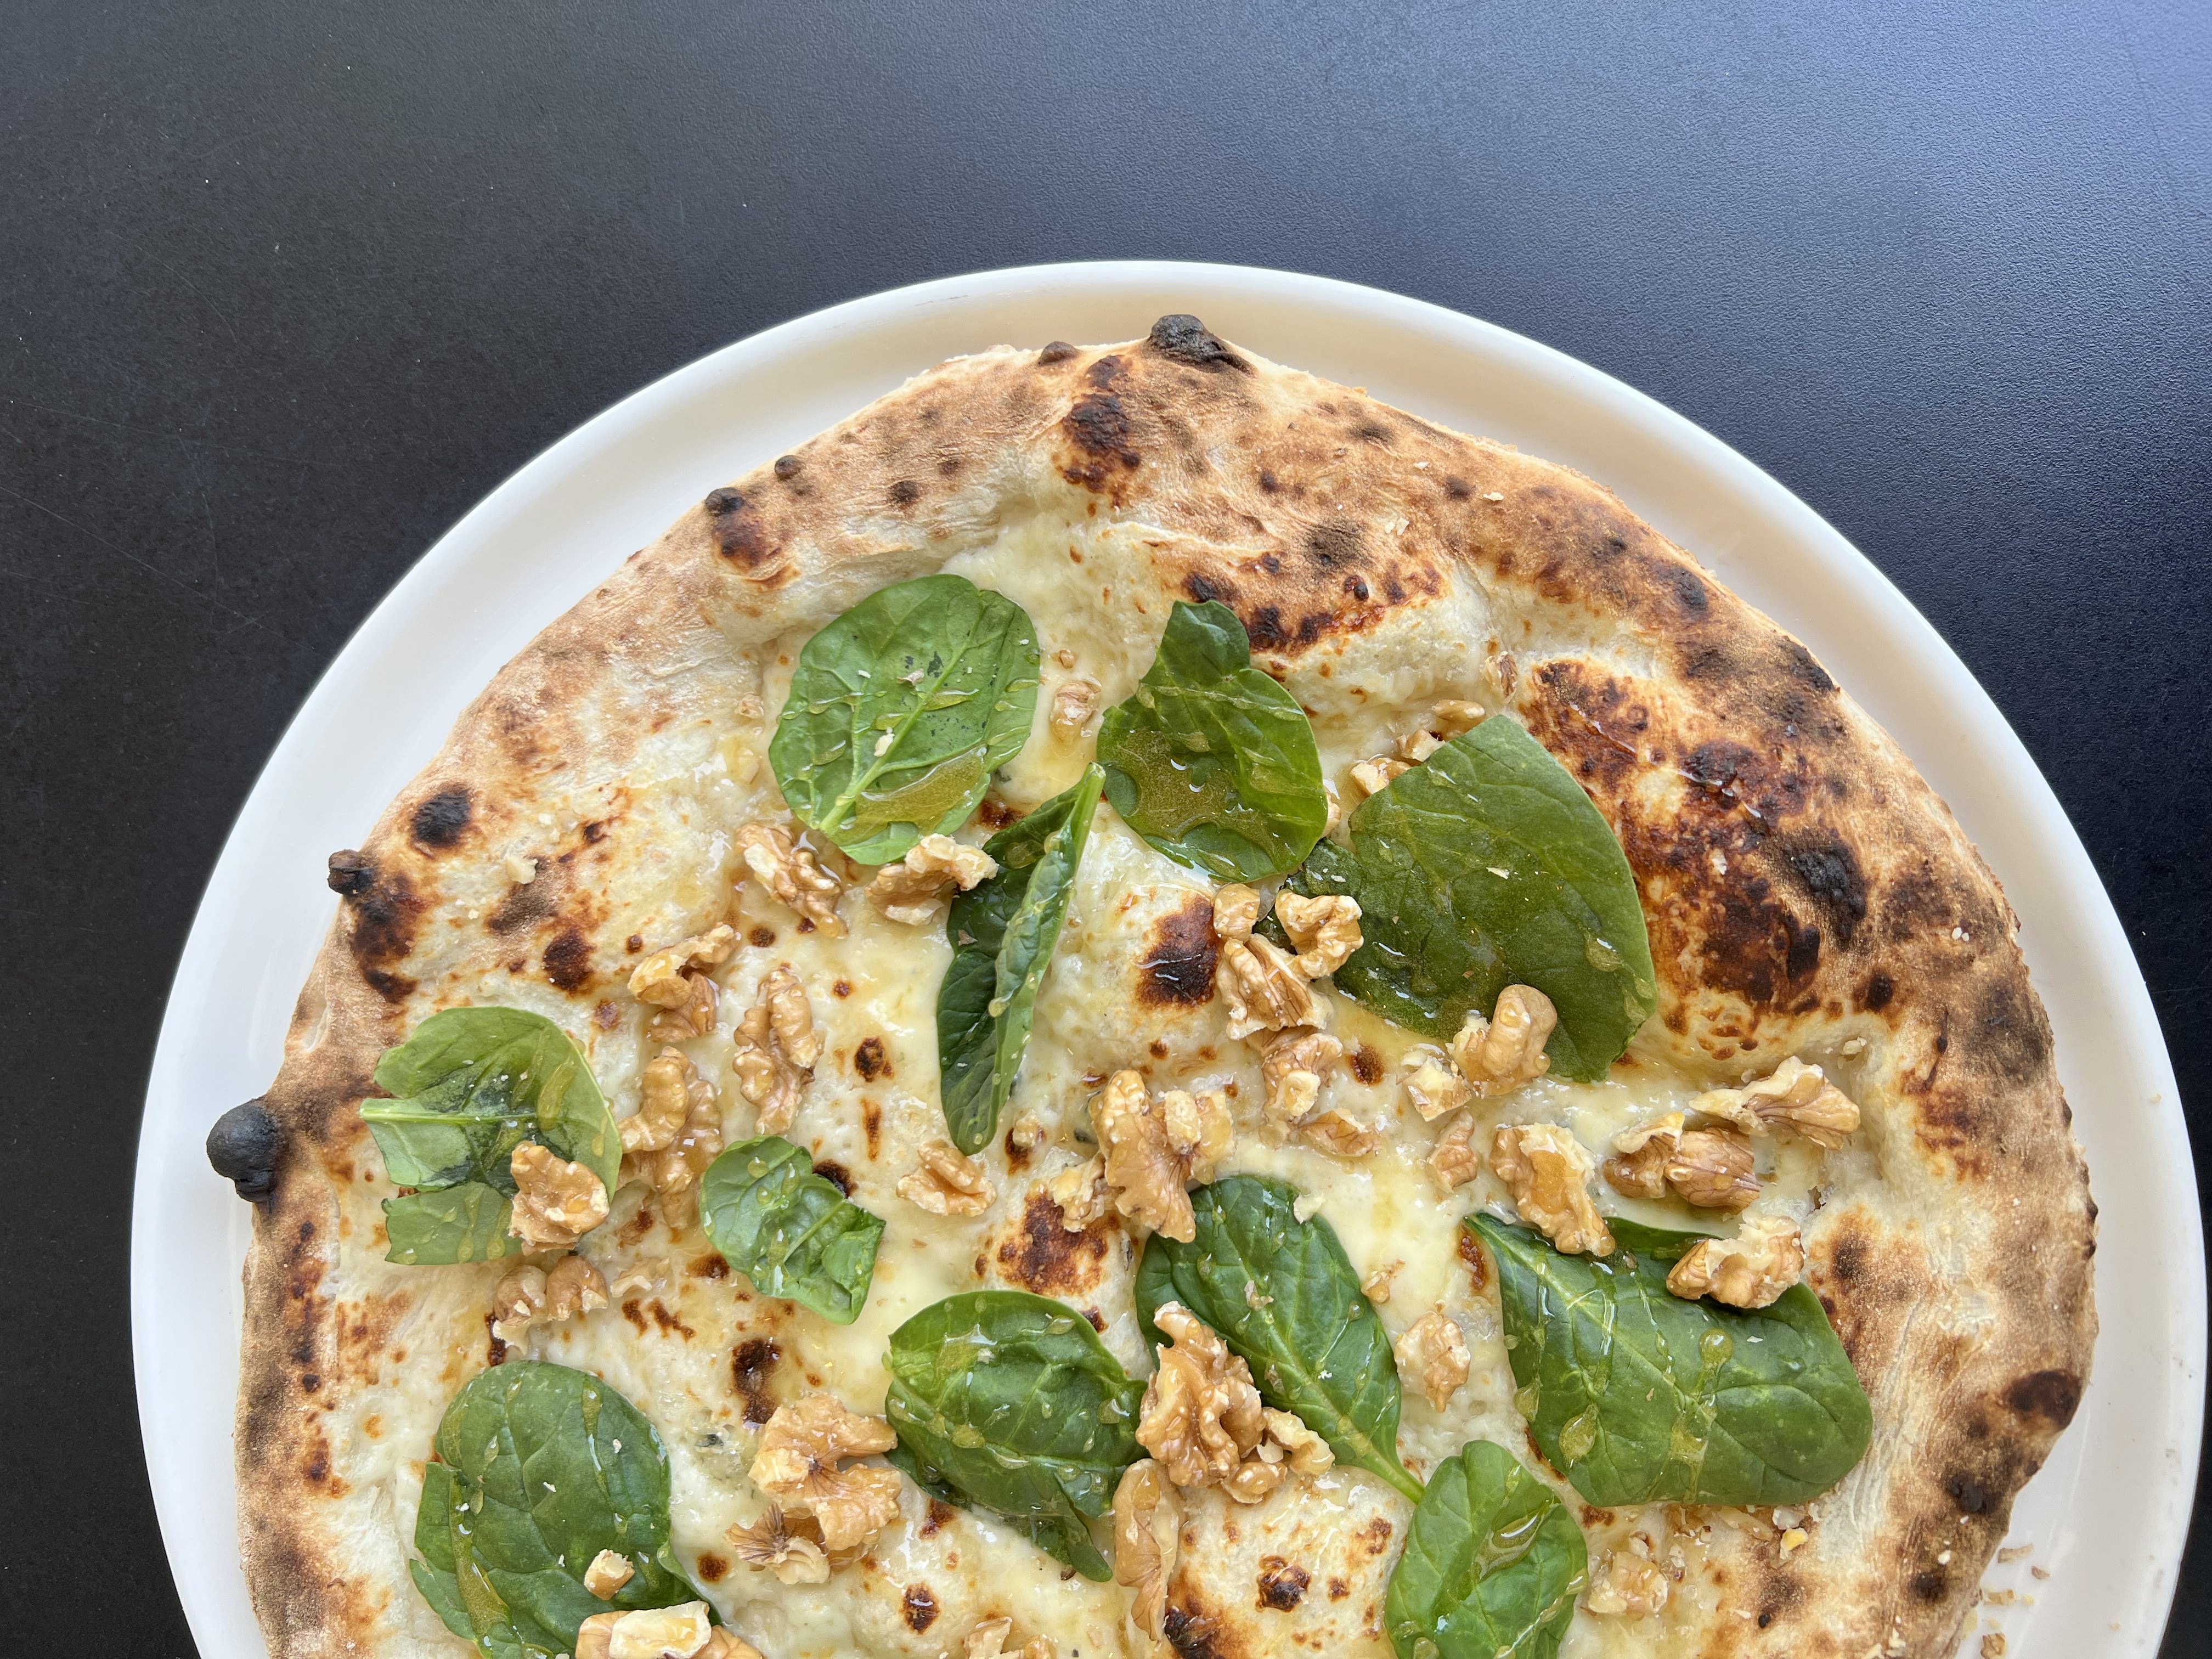 July's Special - Honey, Blue Cheese & Walnut Pizza